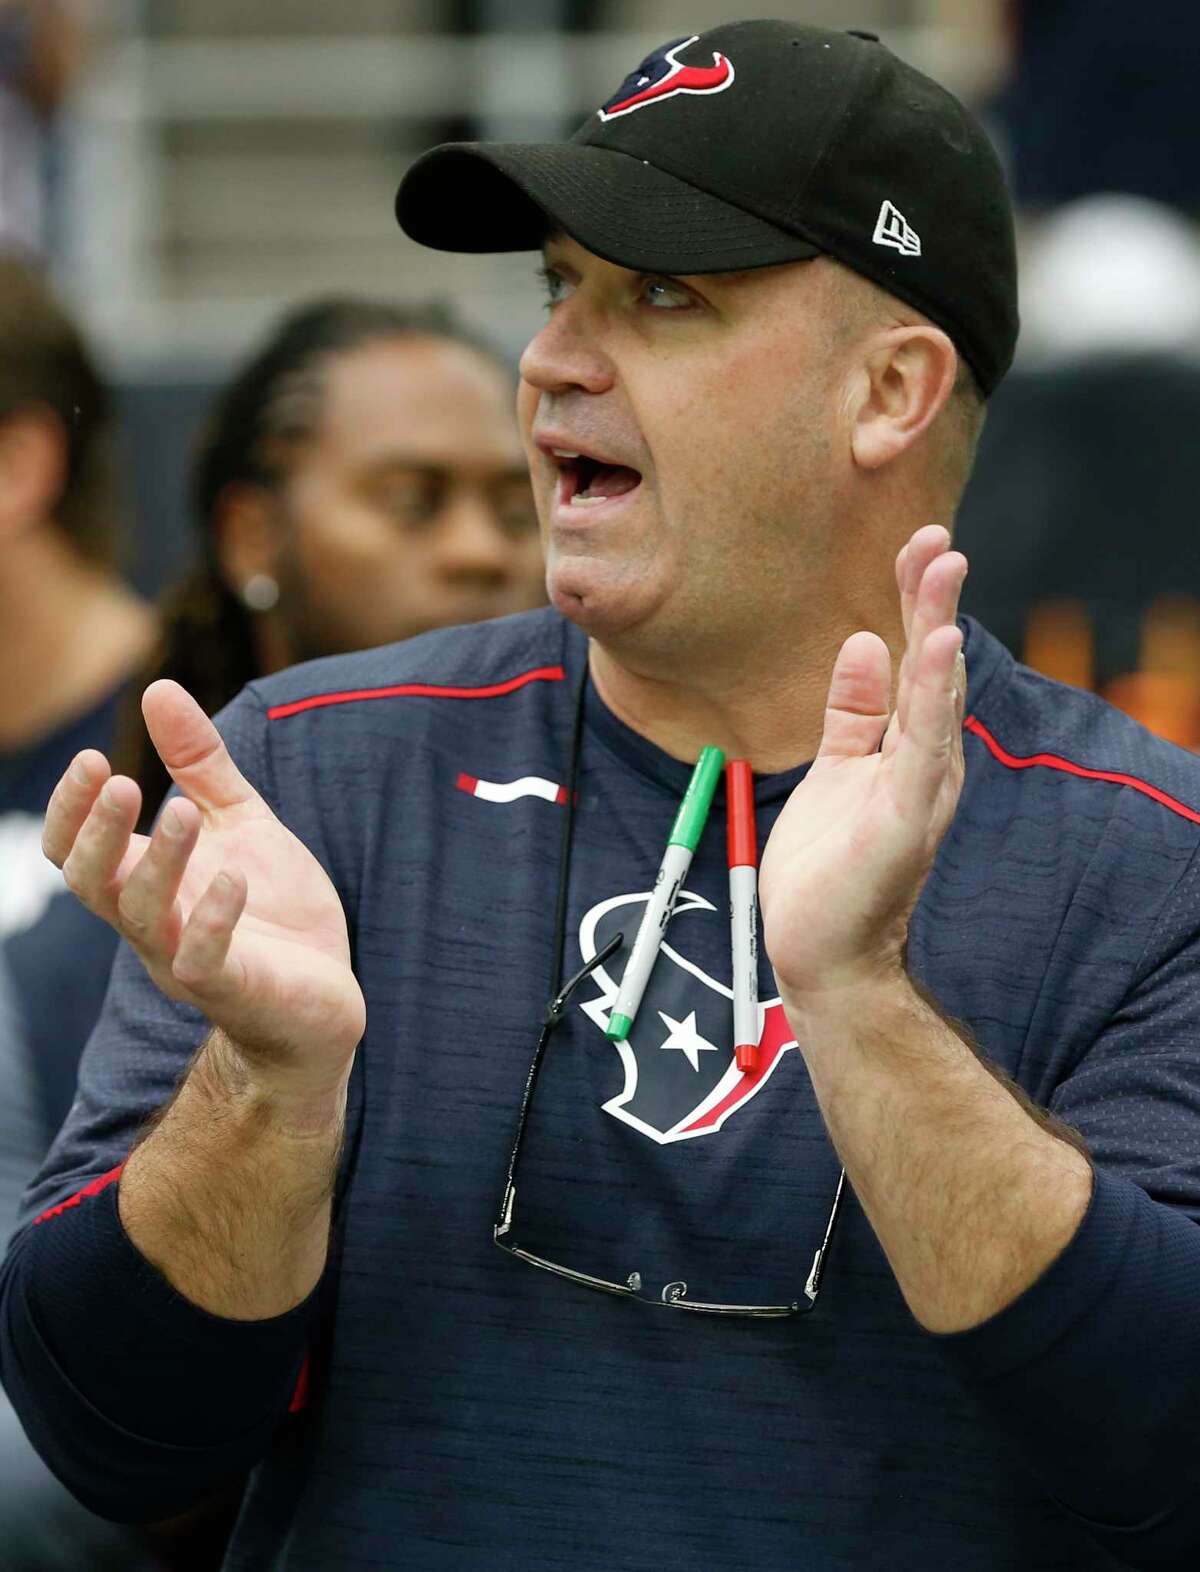 Texans head coach Bill O'Brien has been cheering on the Astros this season and regularly exchanges text messages with Astros manager A.J. Hinch.